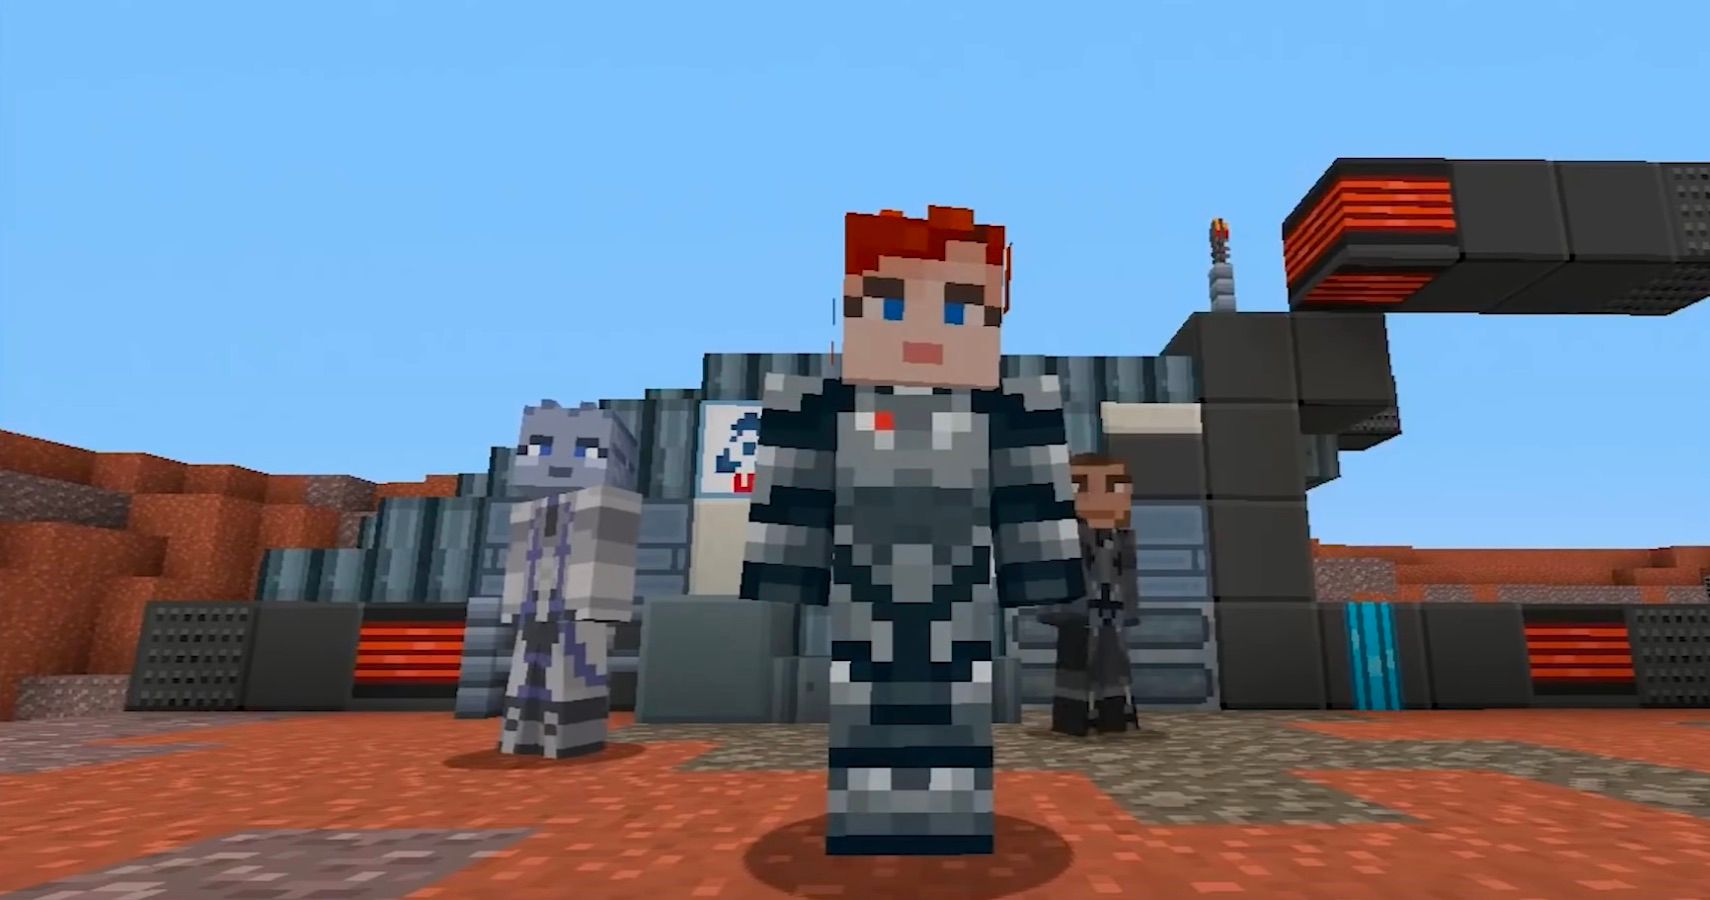 Minecraft Mass Effect Mash Up Lets Players Explore As Commander Shepard Once Again